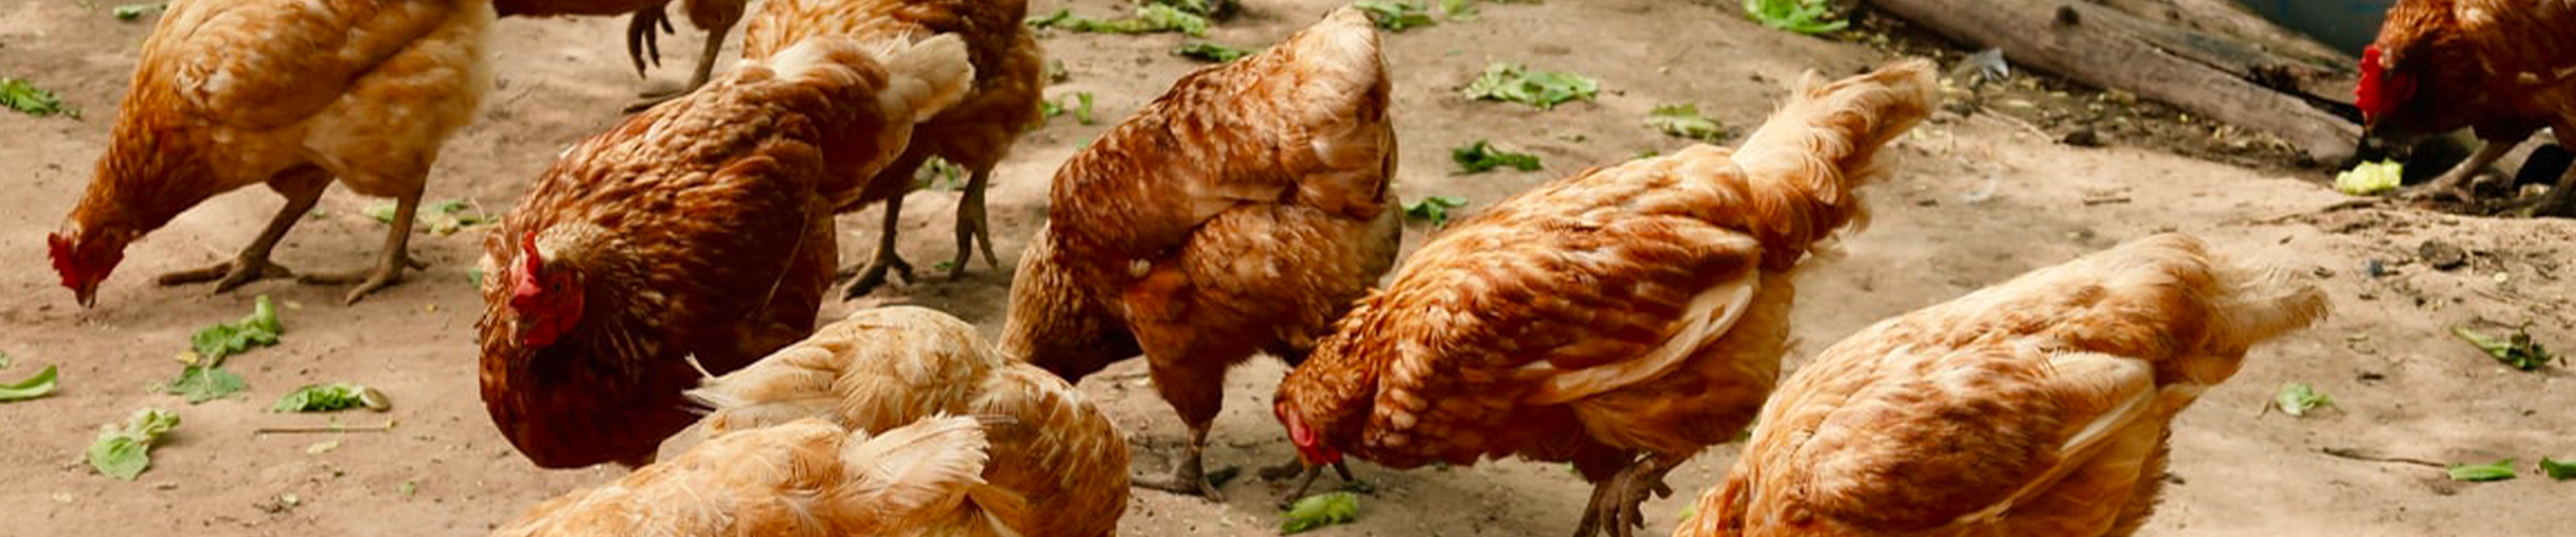 THE ULTIMATE CHICKEN QUIZ: DO YOU KNOW WHAT YOU CAN AND CANT FEED BACKYARD CHICKENS